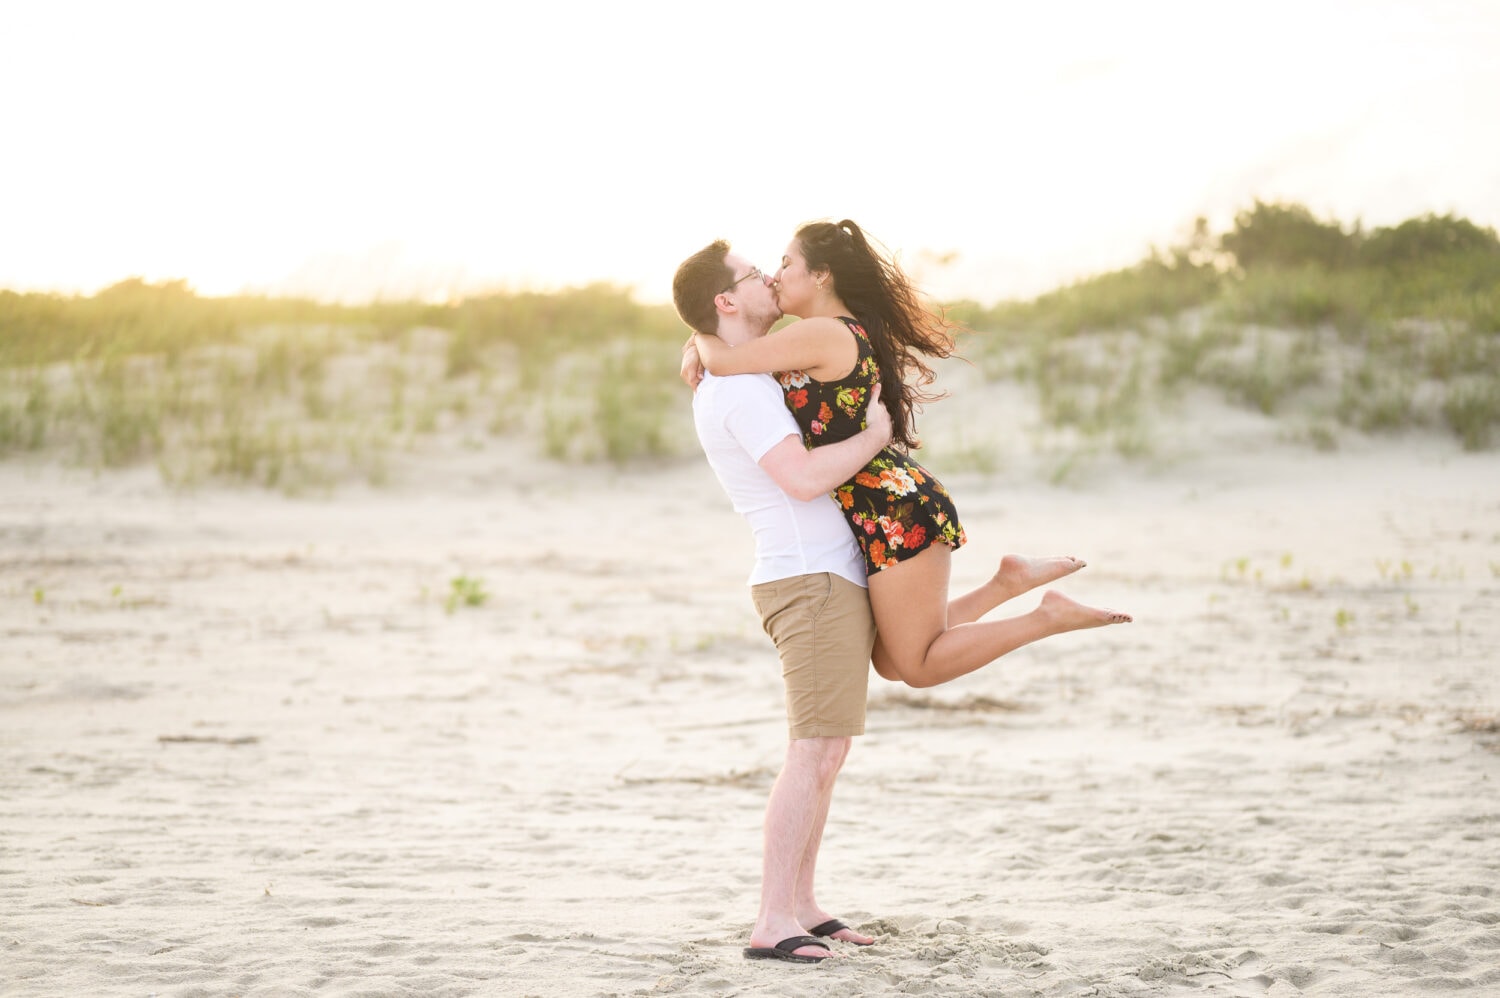 Lifting fiance into the air in the sunset - Huntington Beach State Park - Myrtle Beach